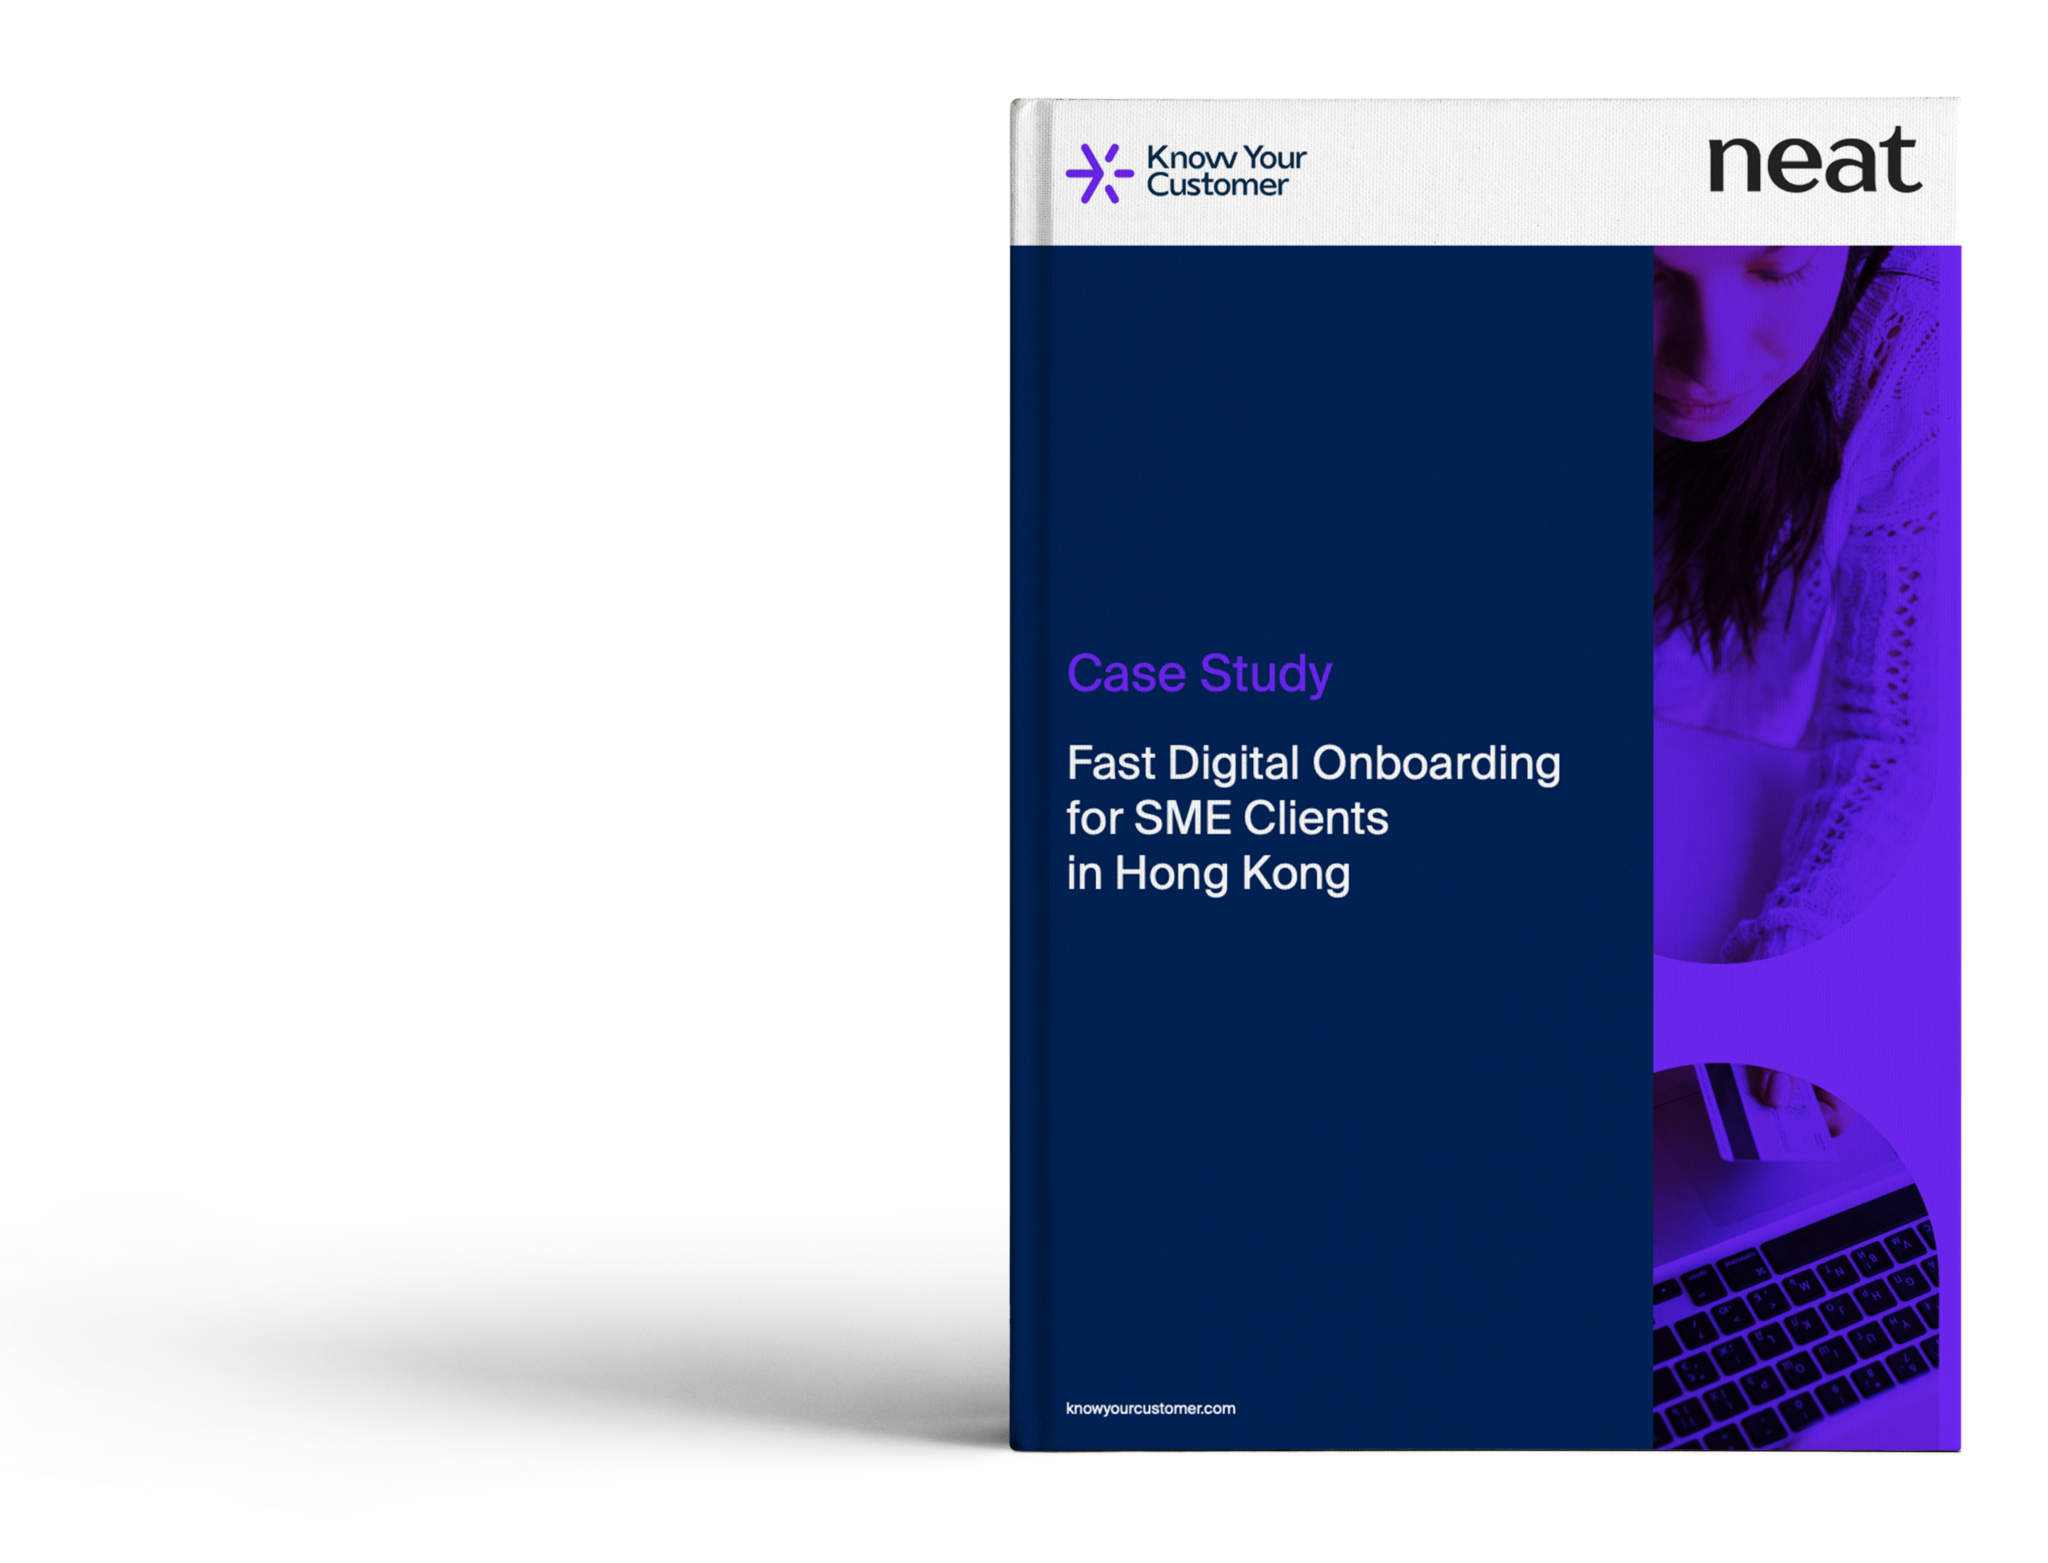 Case Study: Fast Digital Onboarding for SME Clients in Hong Kong